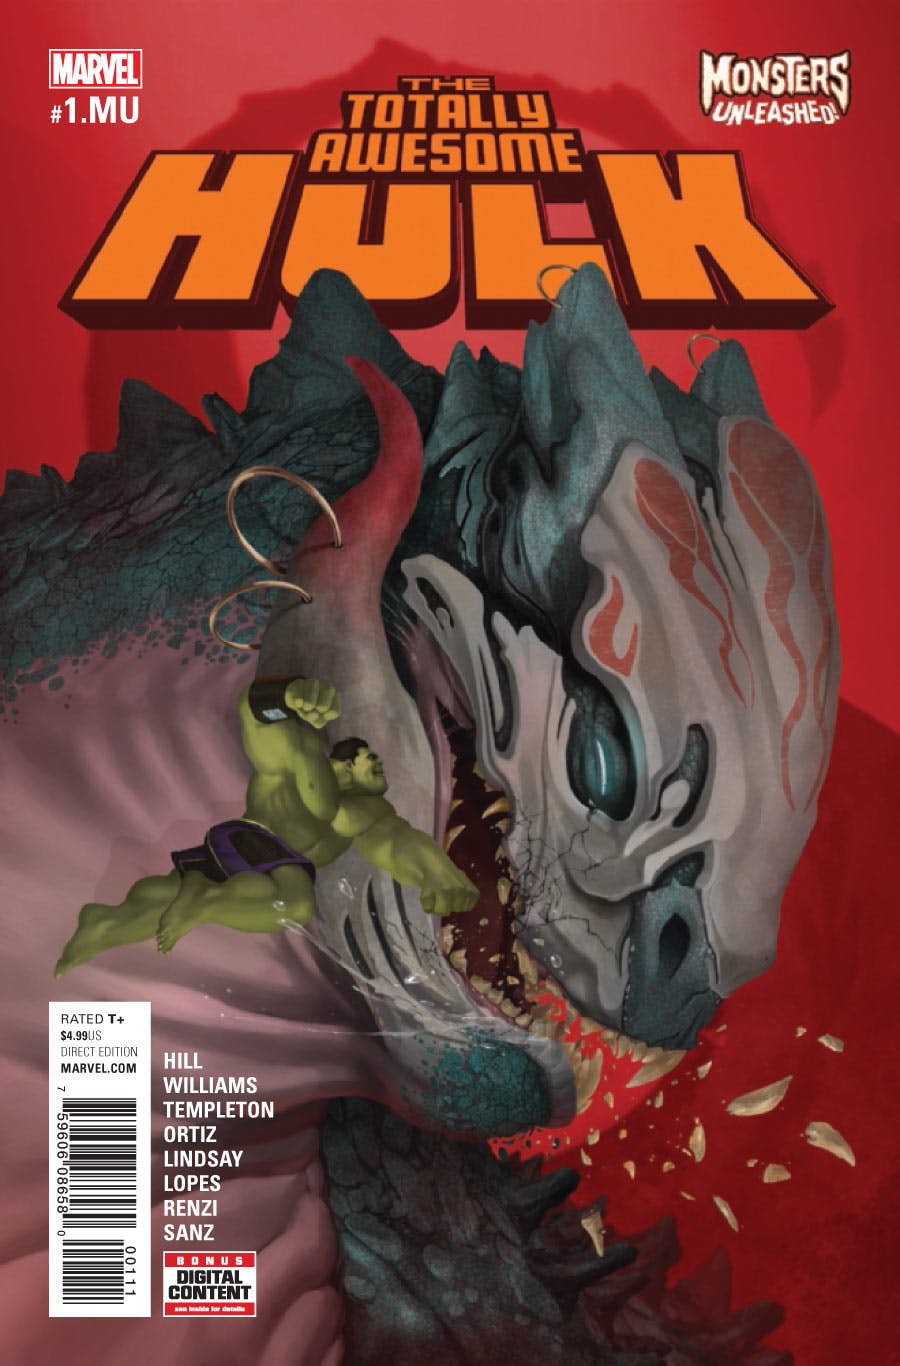 The Totally Awesome Hulk #1 Preview Released